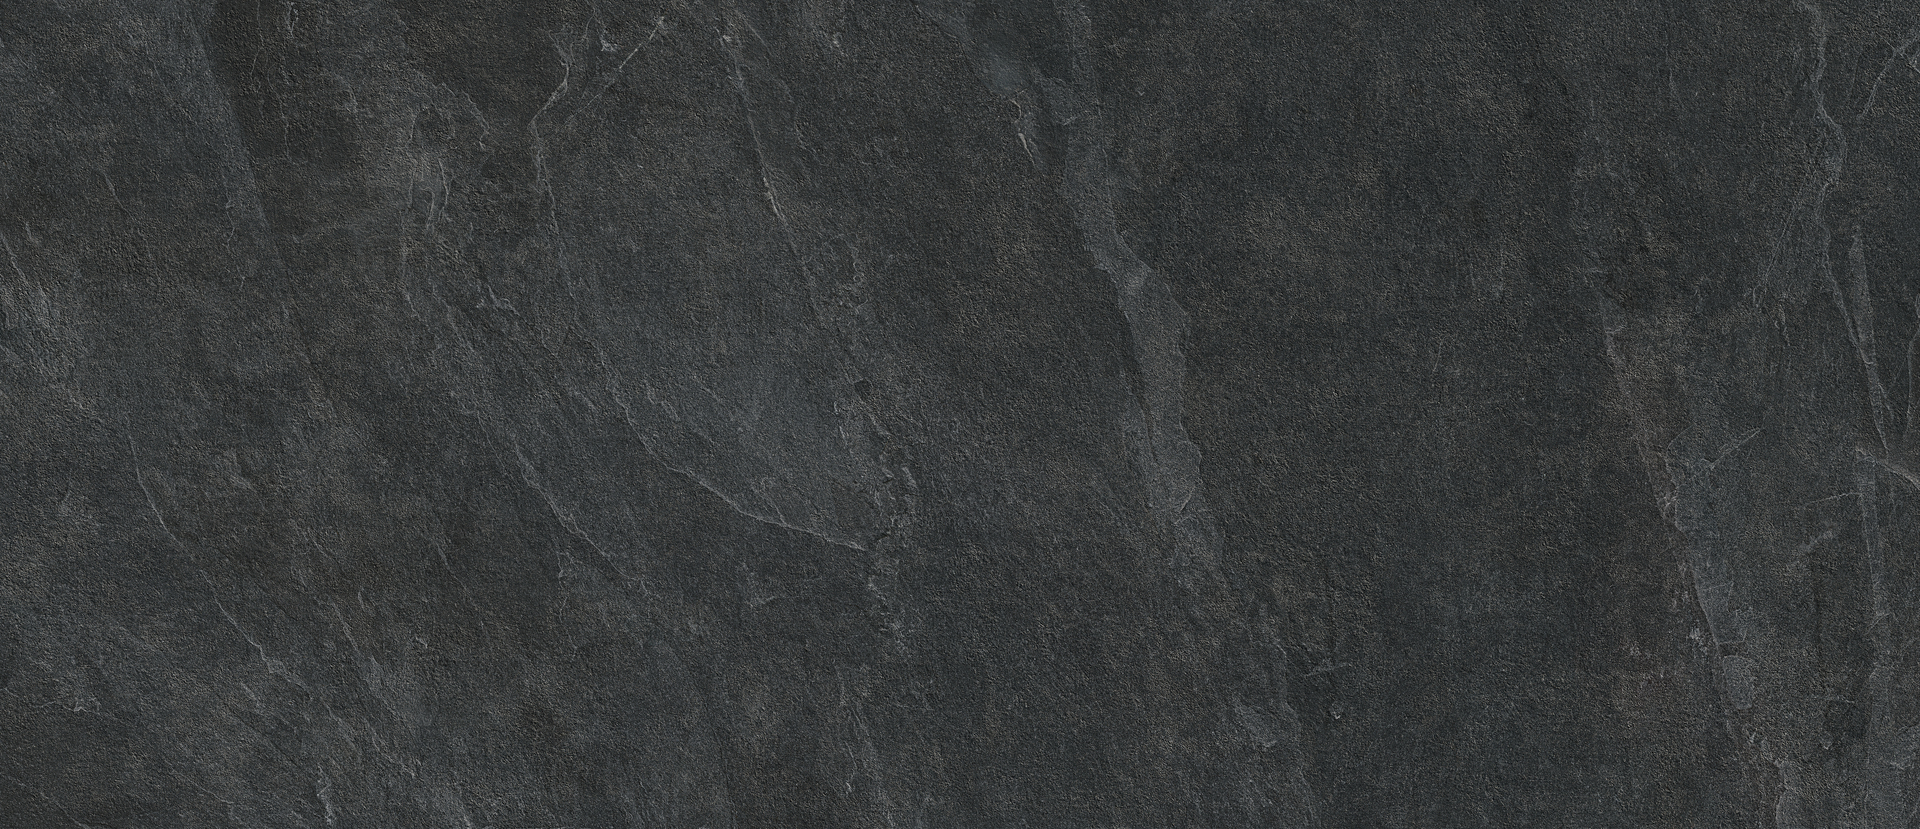 Panaria Zero.3 Stone Trace Abyss Antibacterial - Naturale PZ6ST00 120x278cm rectified 6mm